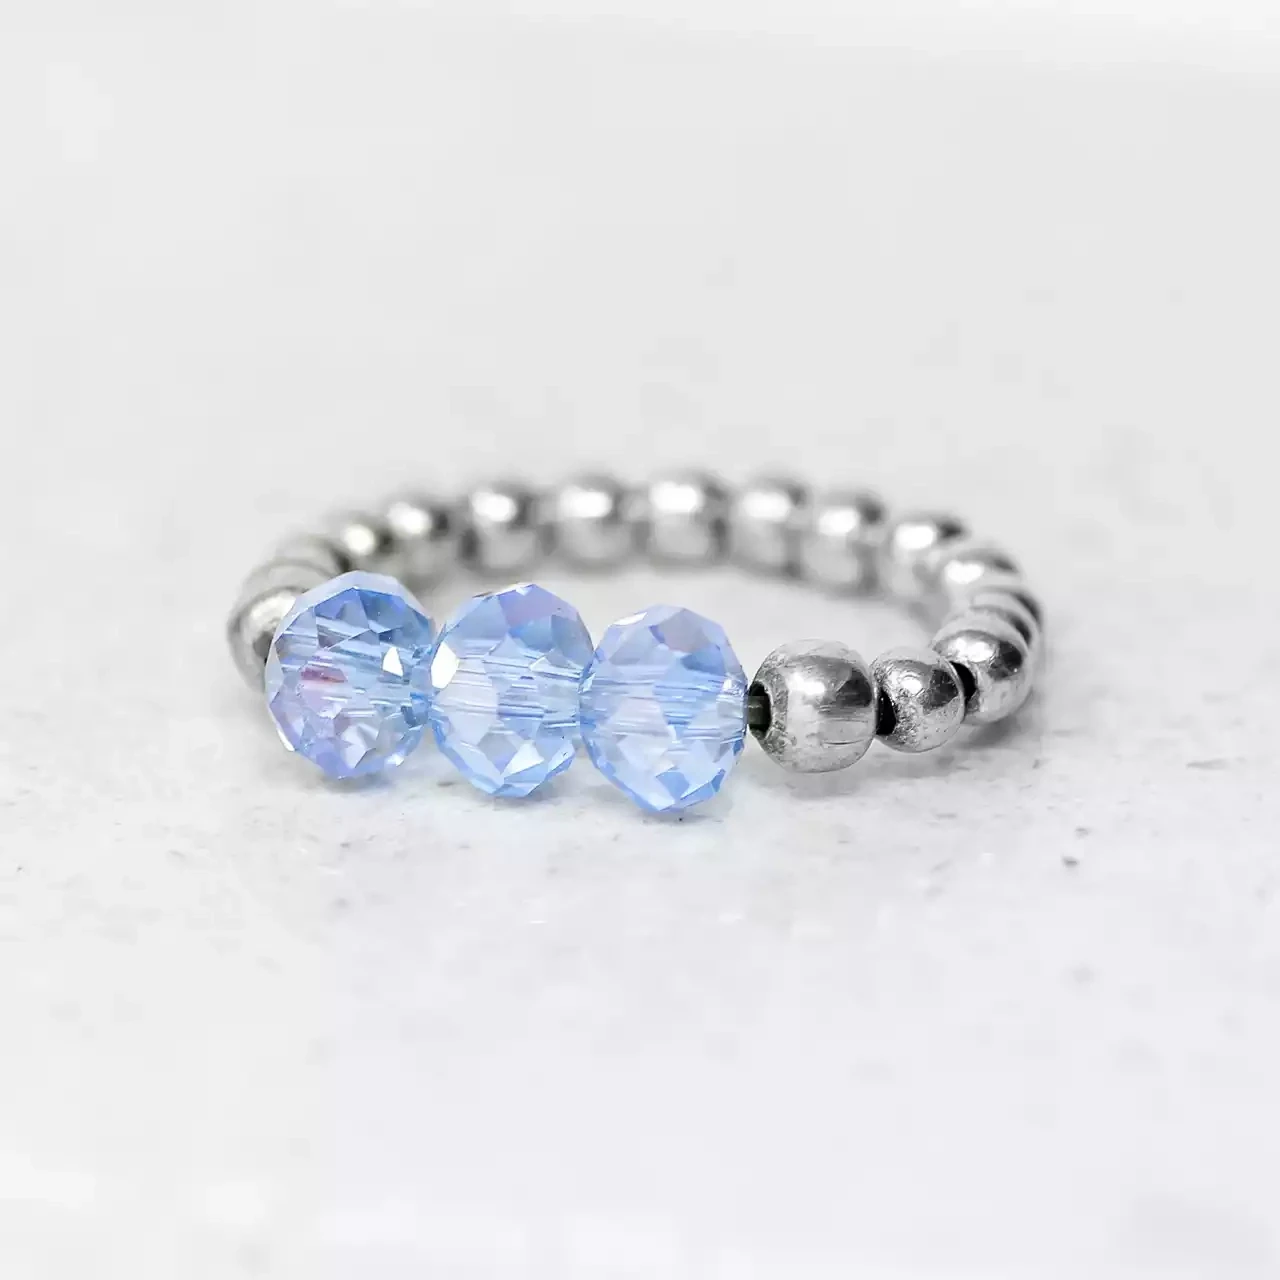 Seed Bead Stretch Ring With Glass Beads - Pale Blue by Metal Planet